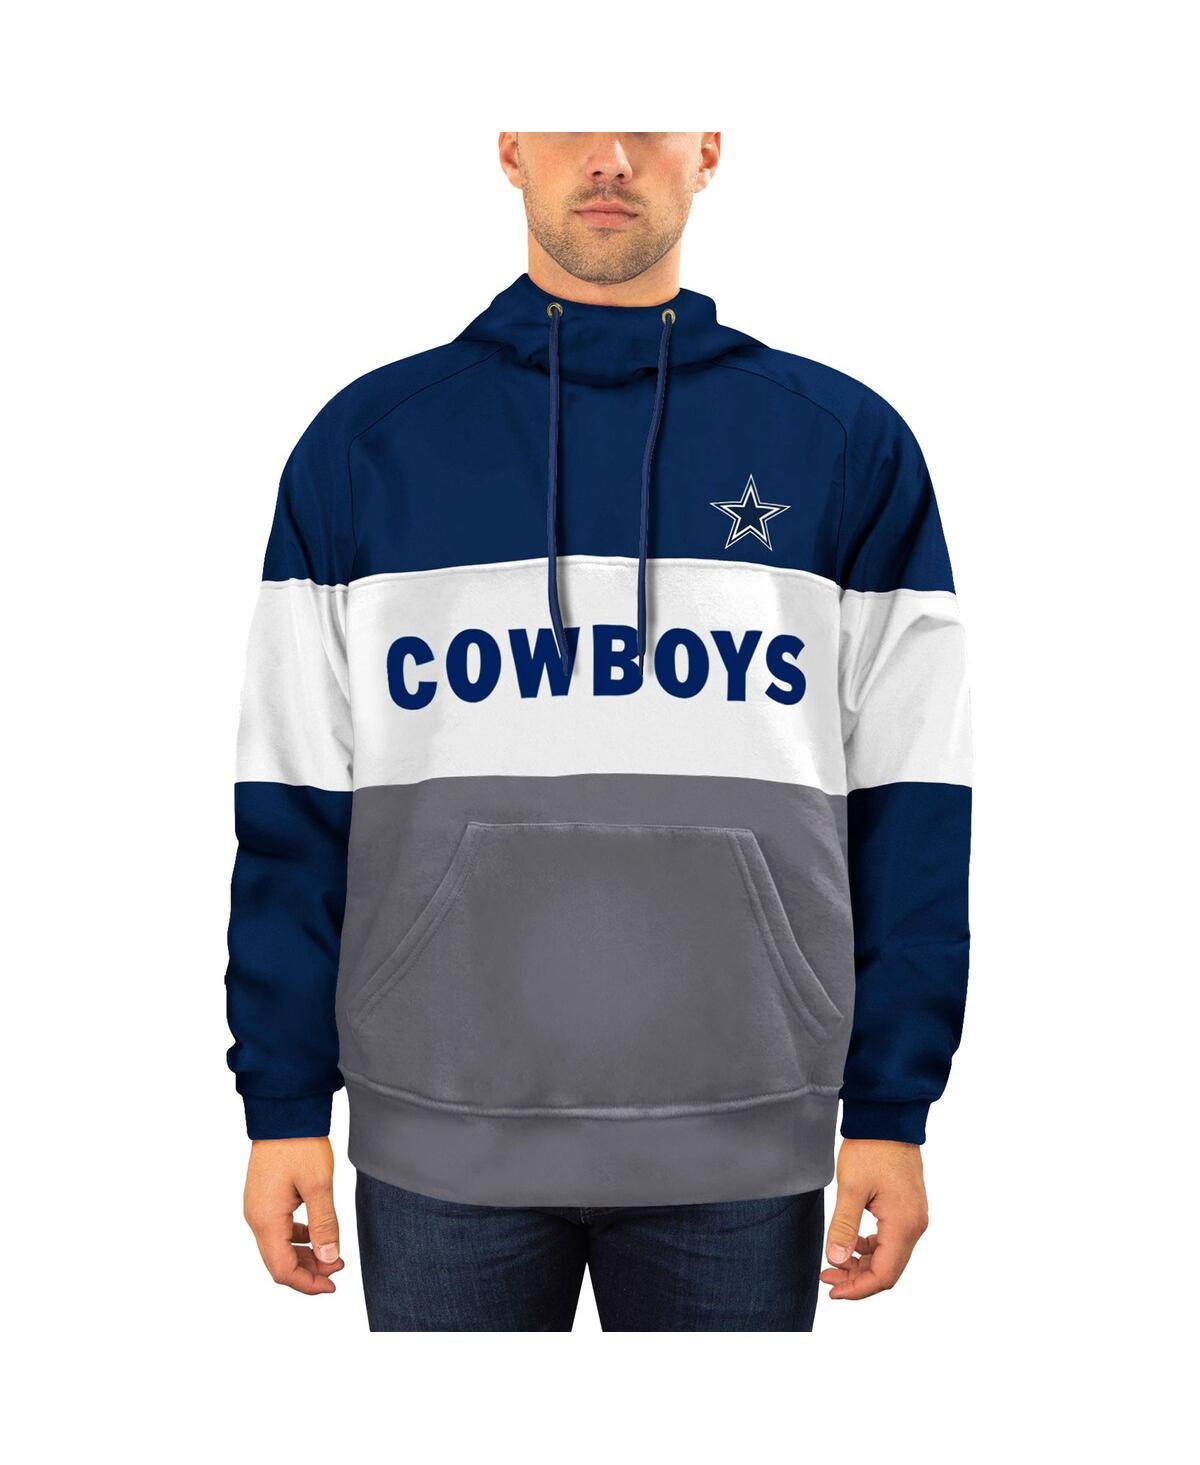 New Era Men's  Navy And Gray Dallas Cowboys Big And Tall Fleece Star Team Pullover Hoodie In Navy,gray